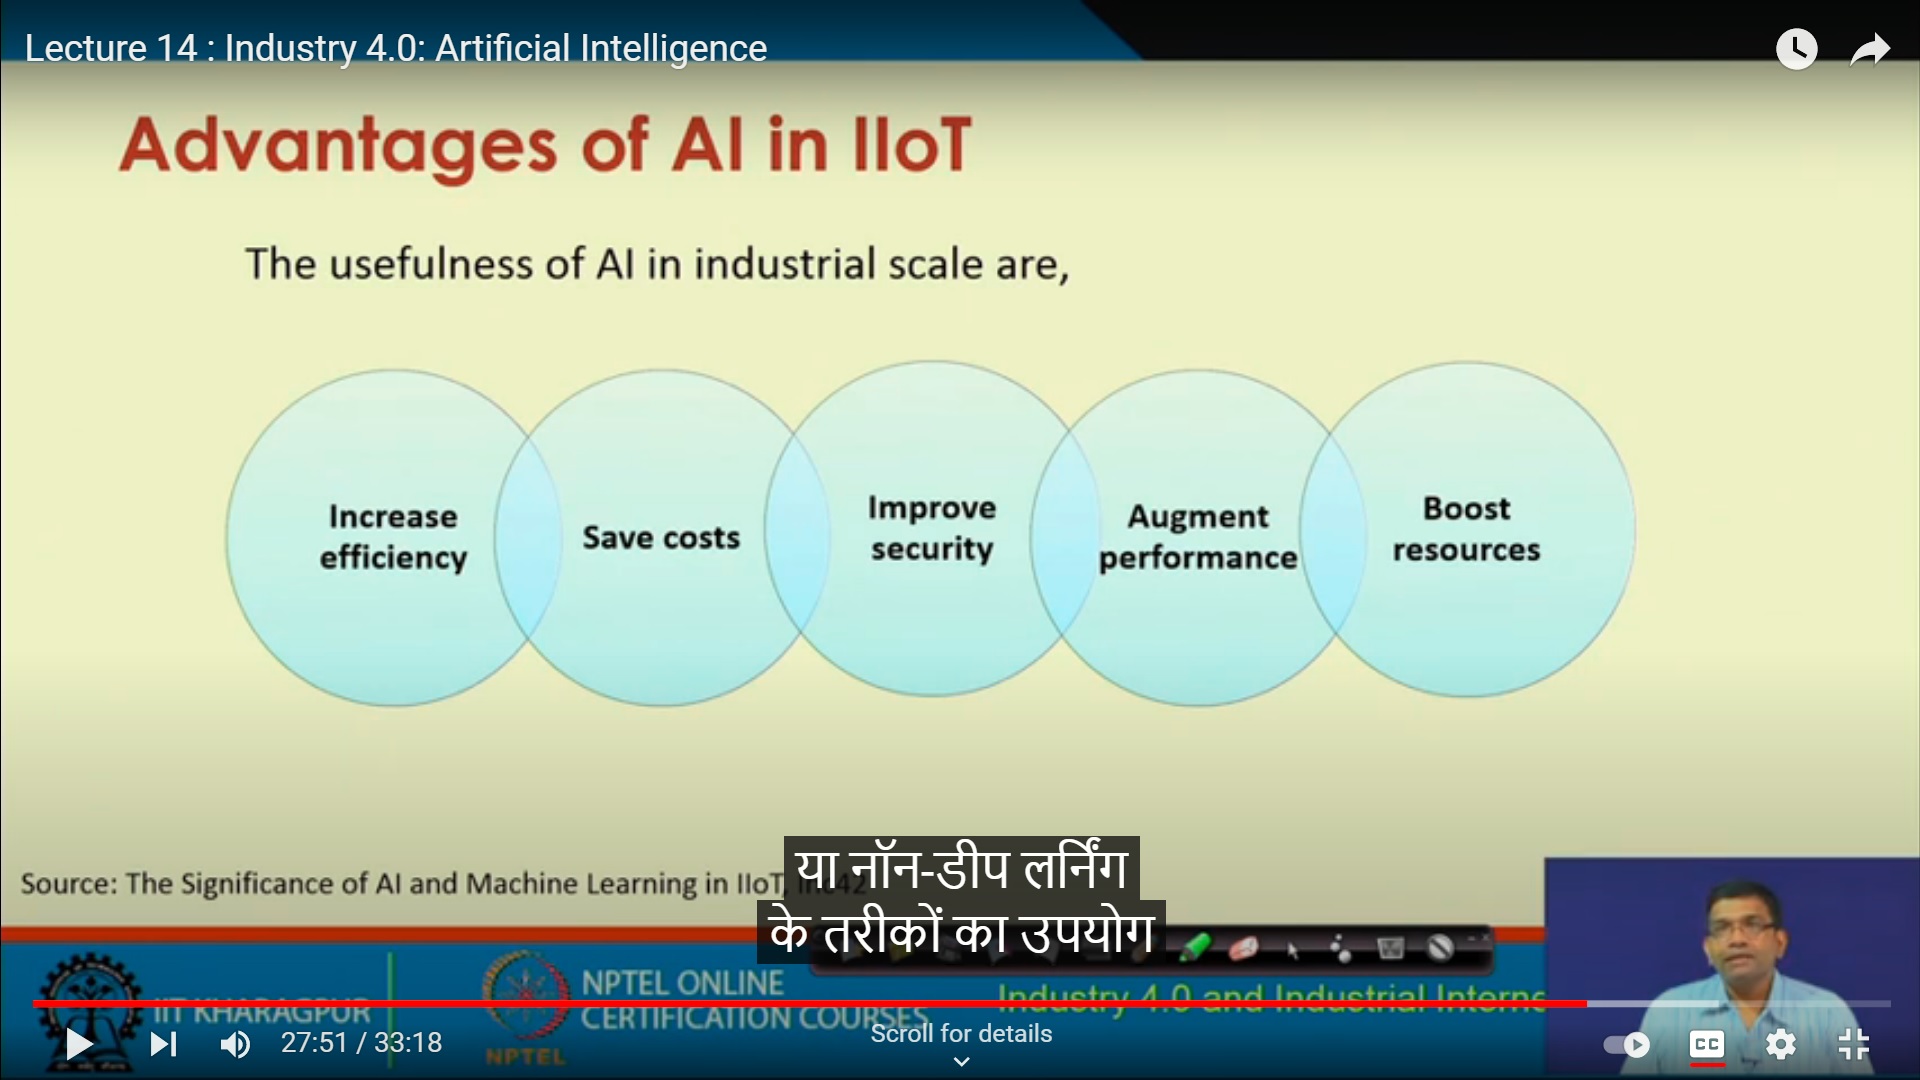 BENEFIST OF AI IN INDUSTRY 4.0